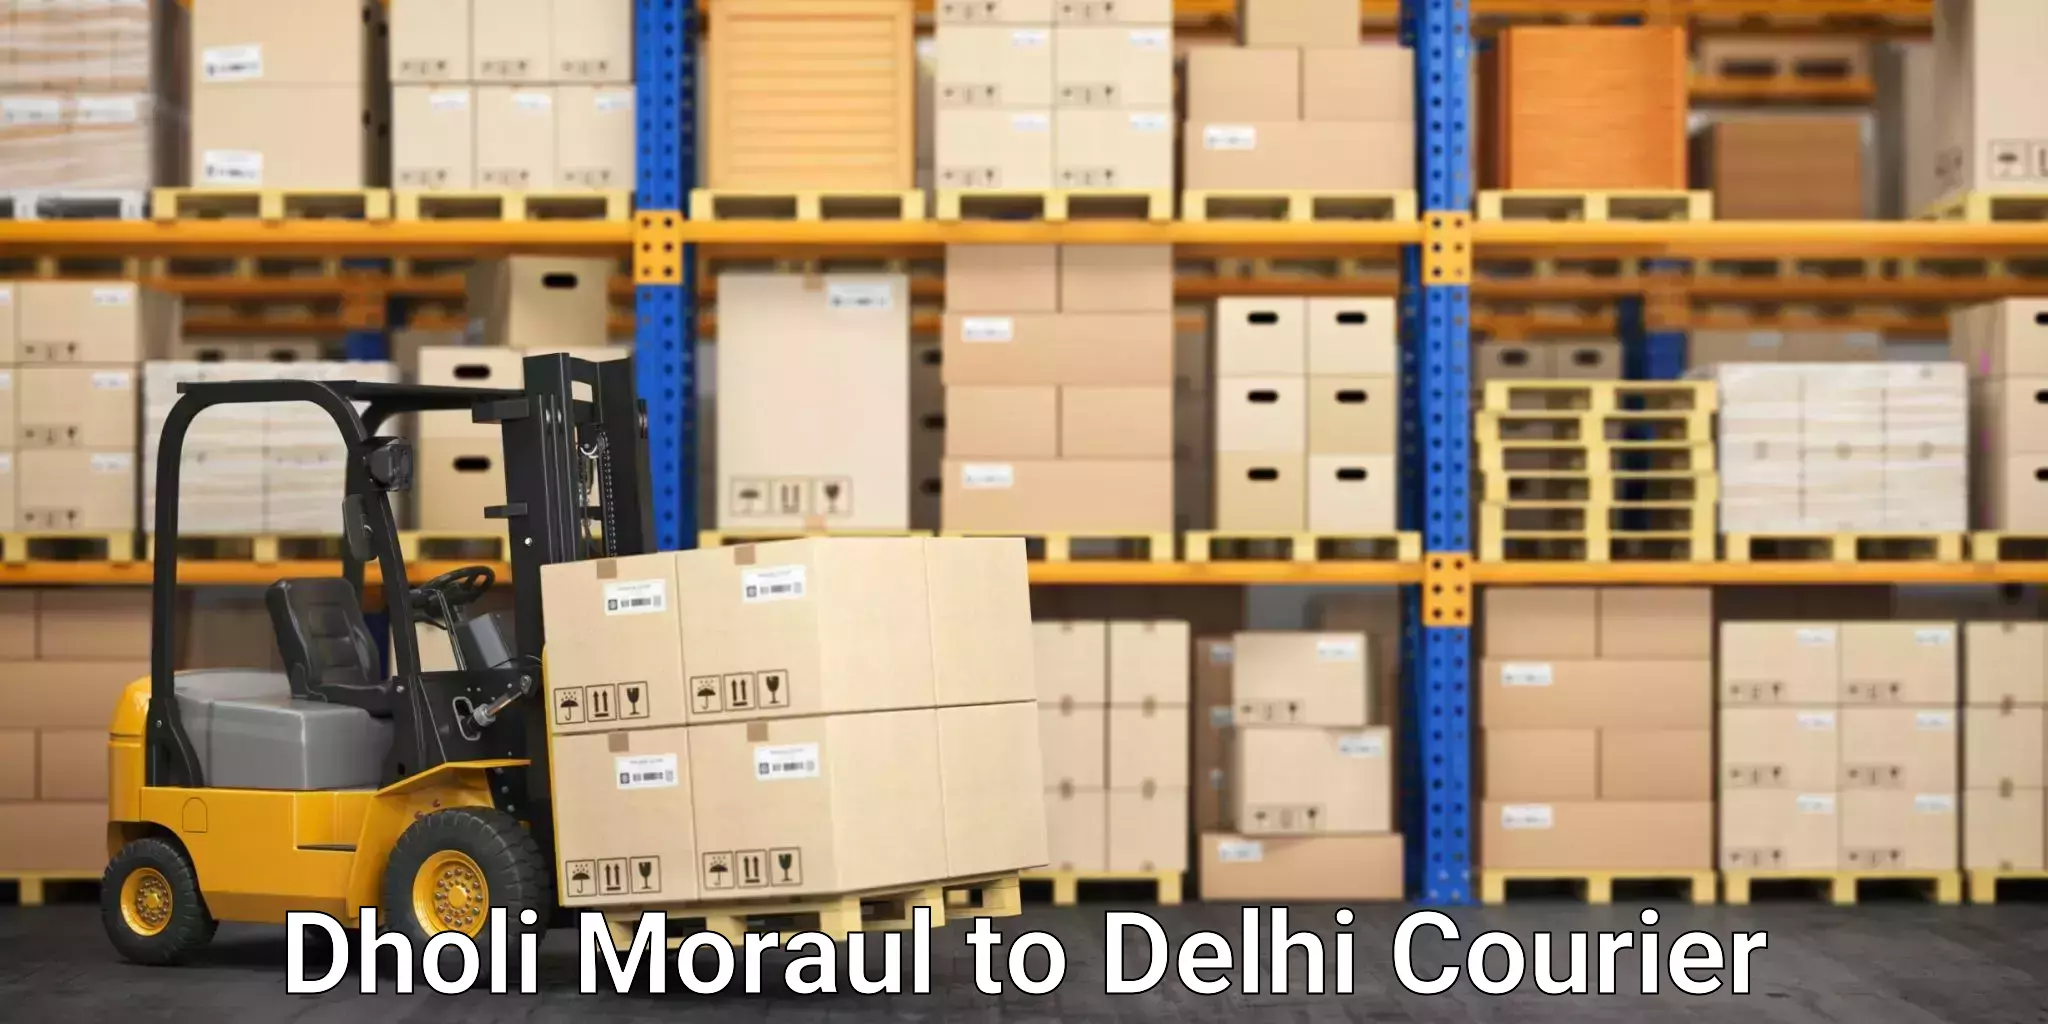 Expert goods movers Dholi Moraul to Lodhi Road